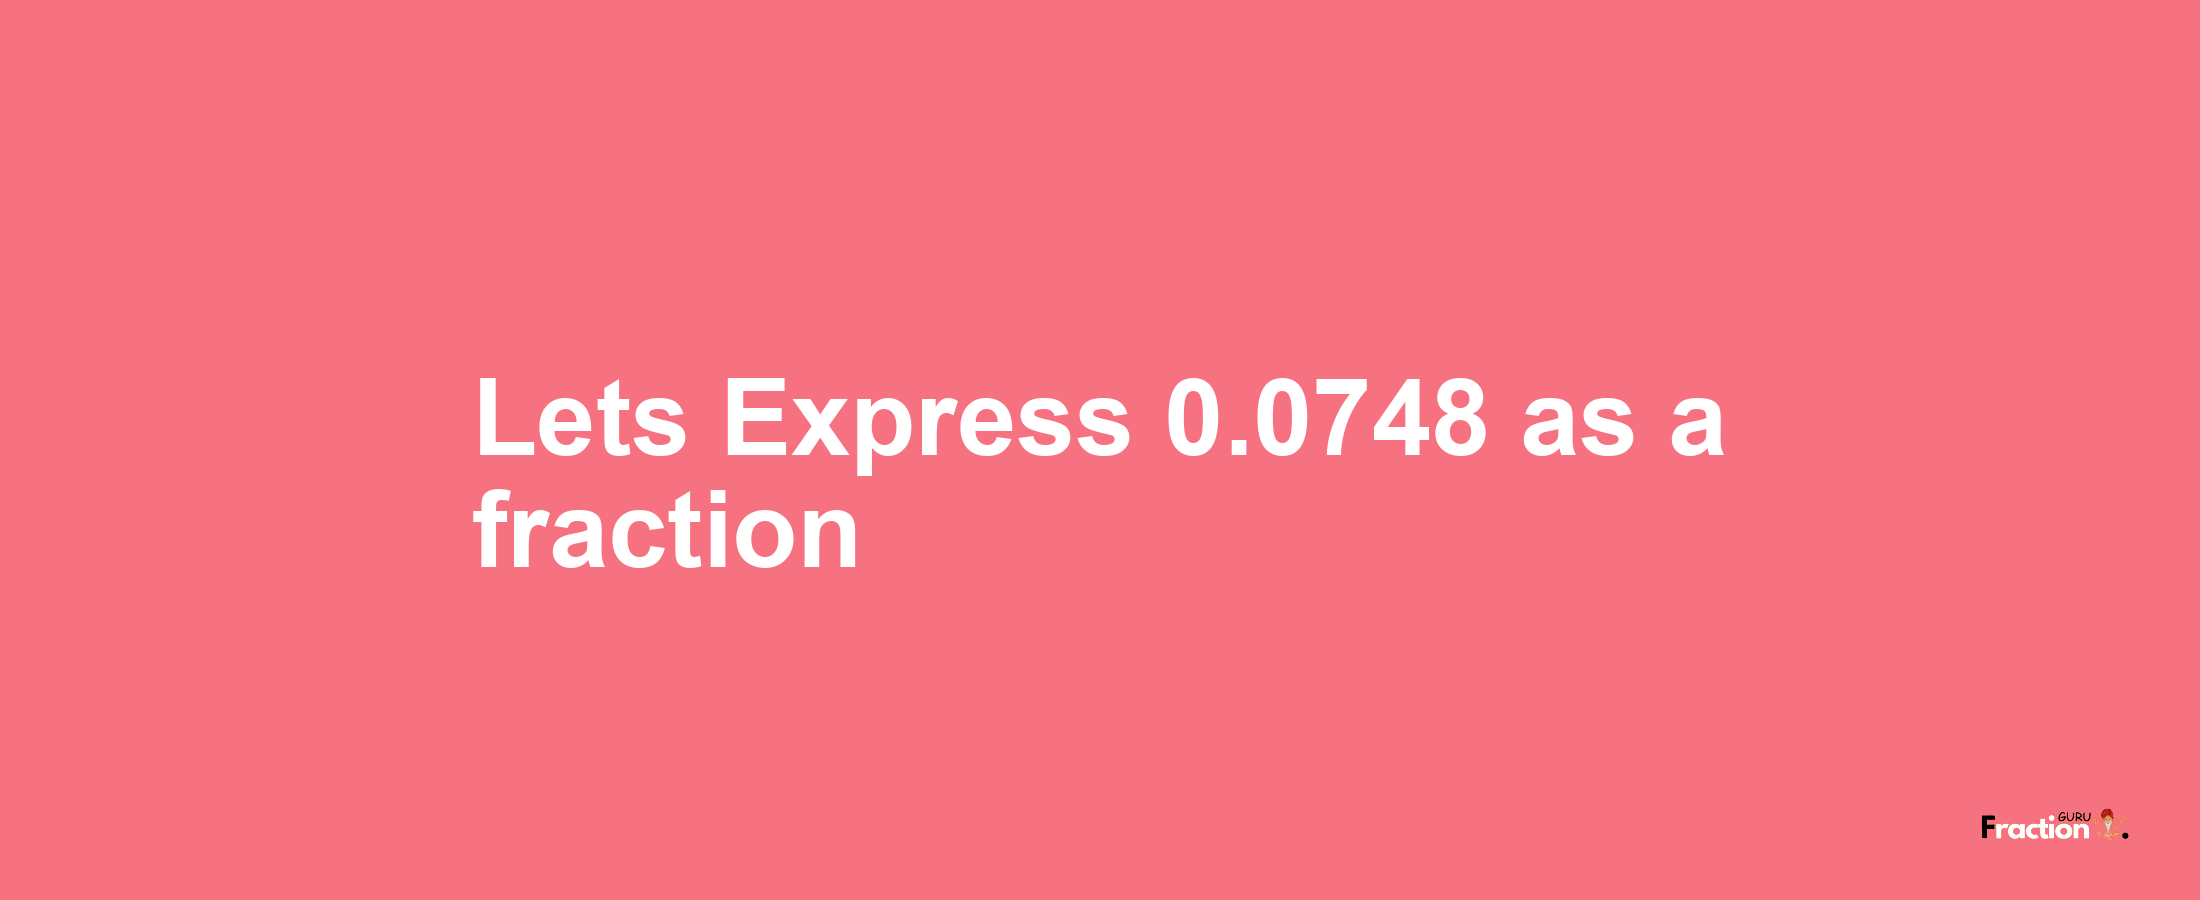 Lets Express 0.0748 as afraction